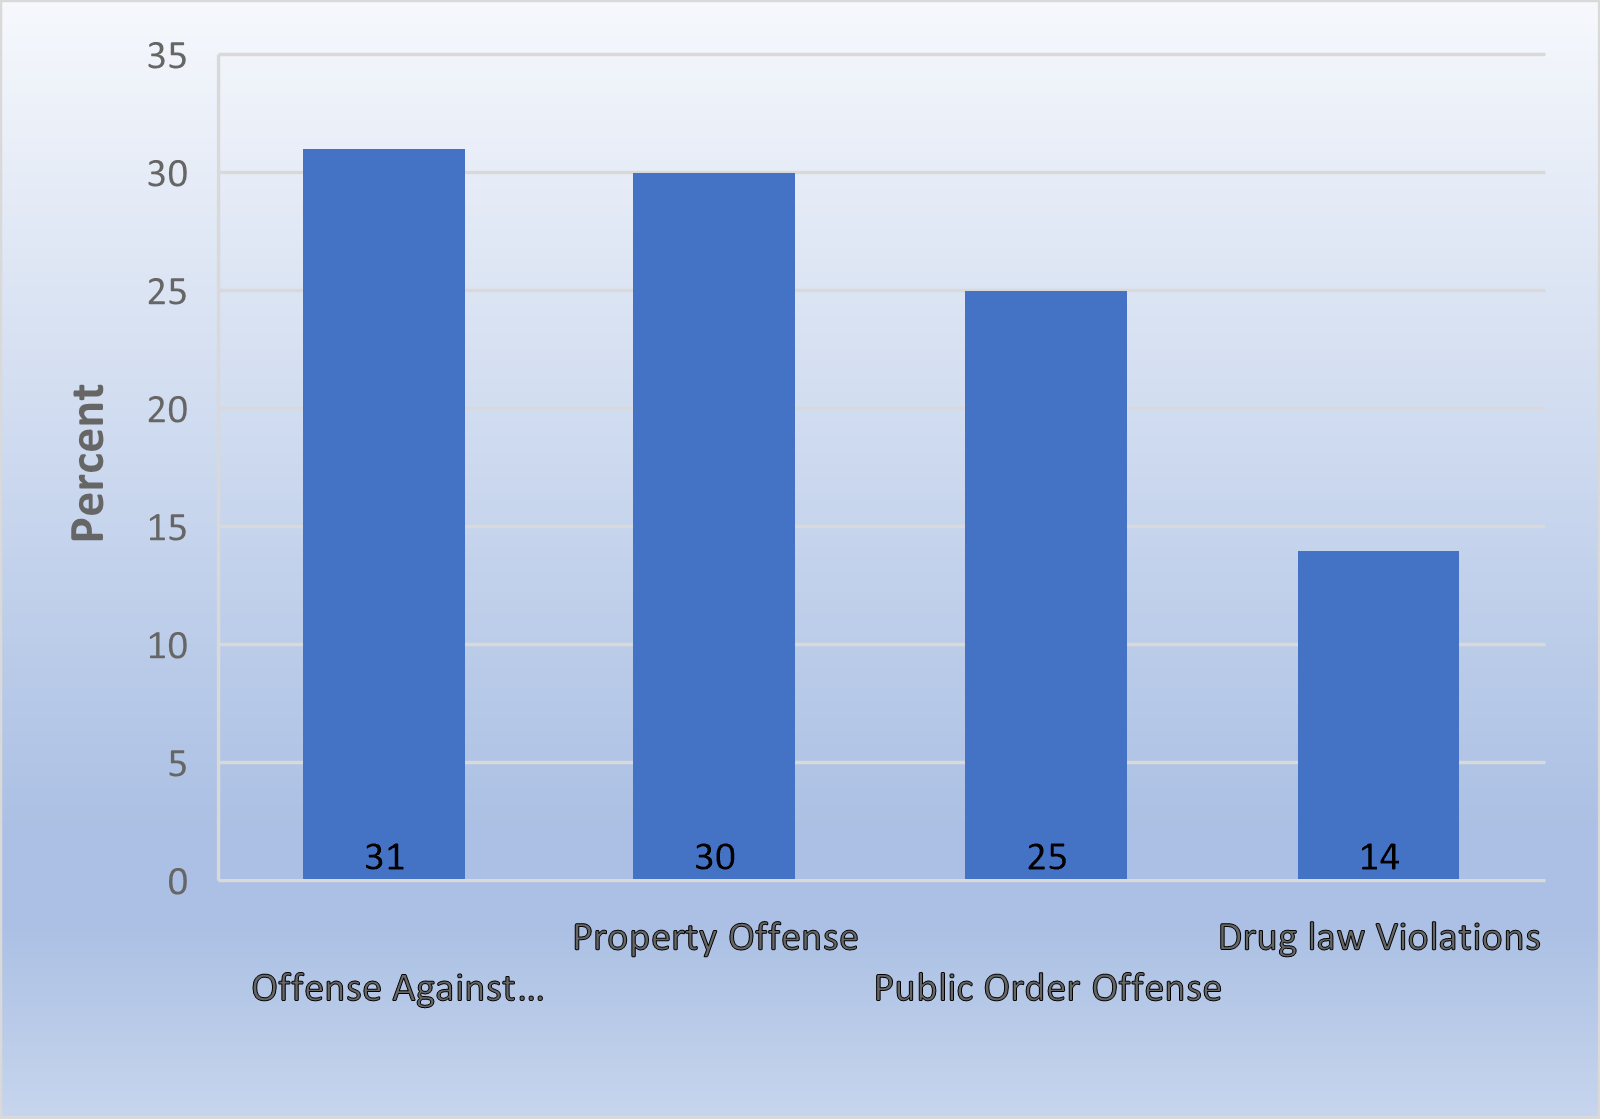 Bar graph showing Percent of Juvenile Court Involvement Charges by Type for Youth Between the Ages of 12 and 17 in 2018 